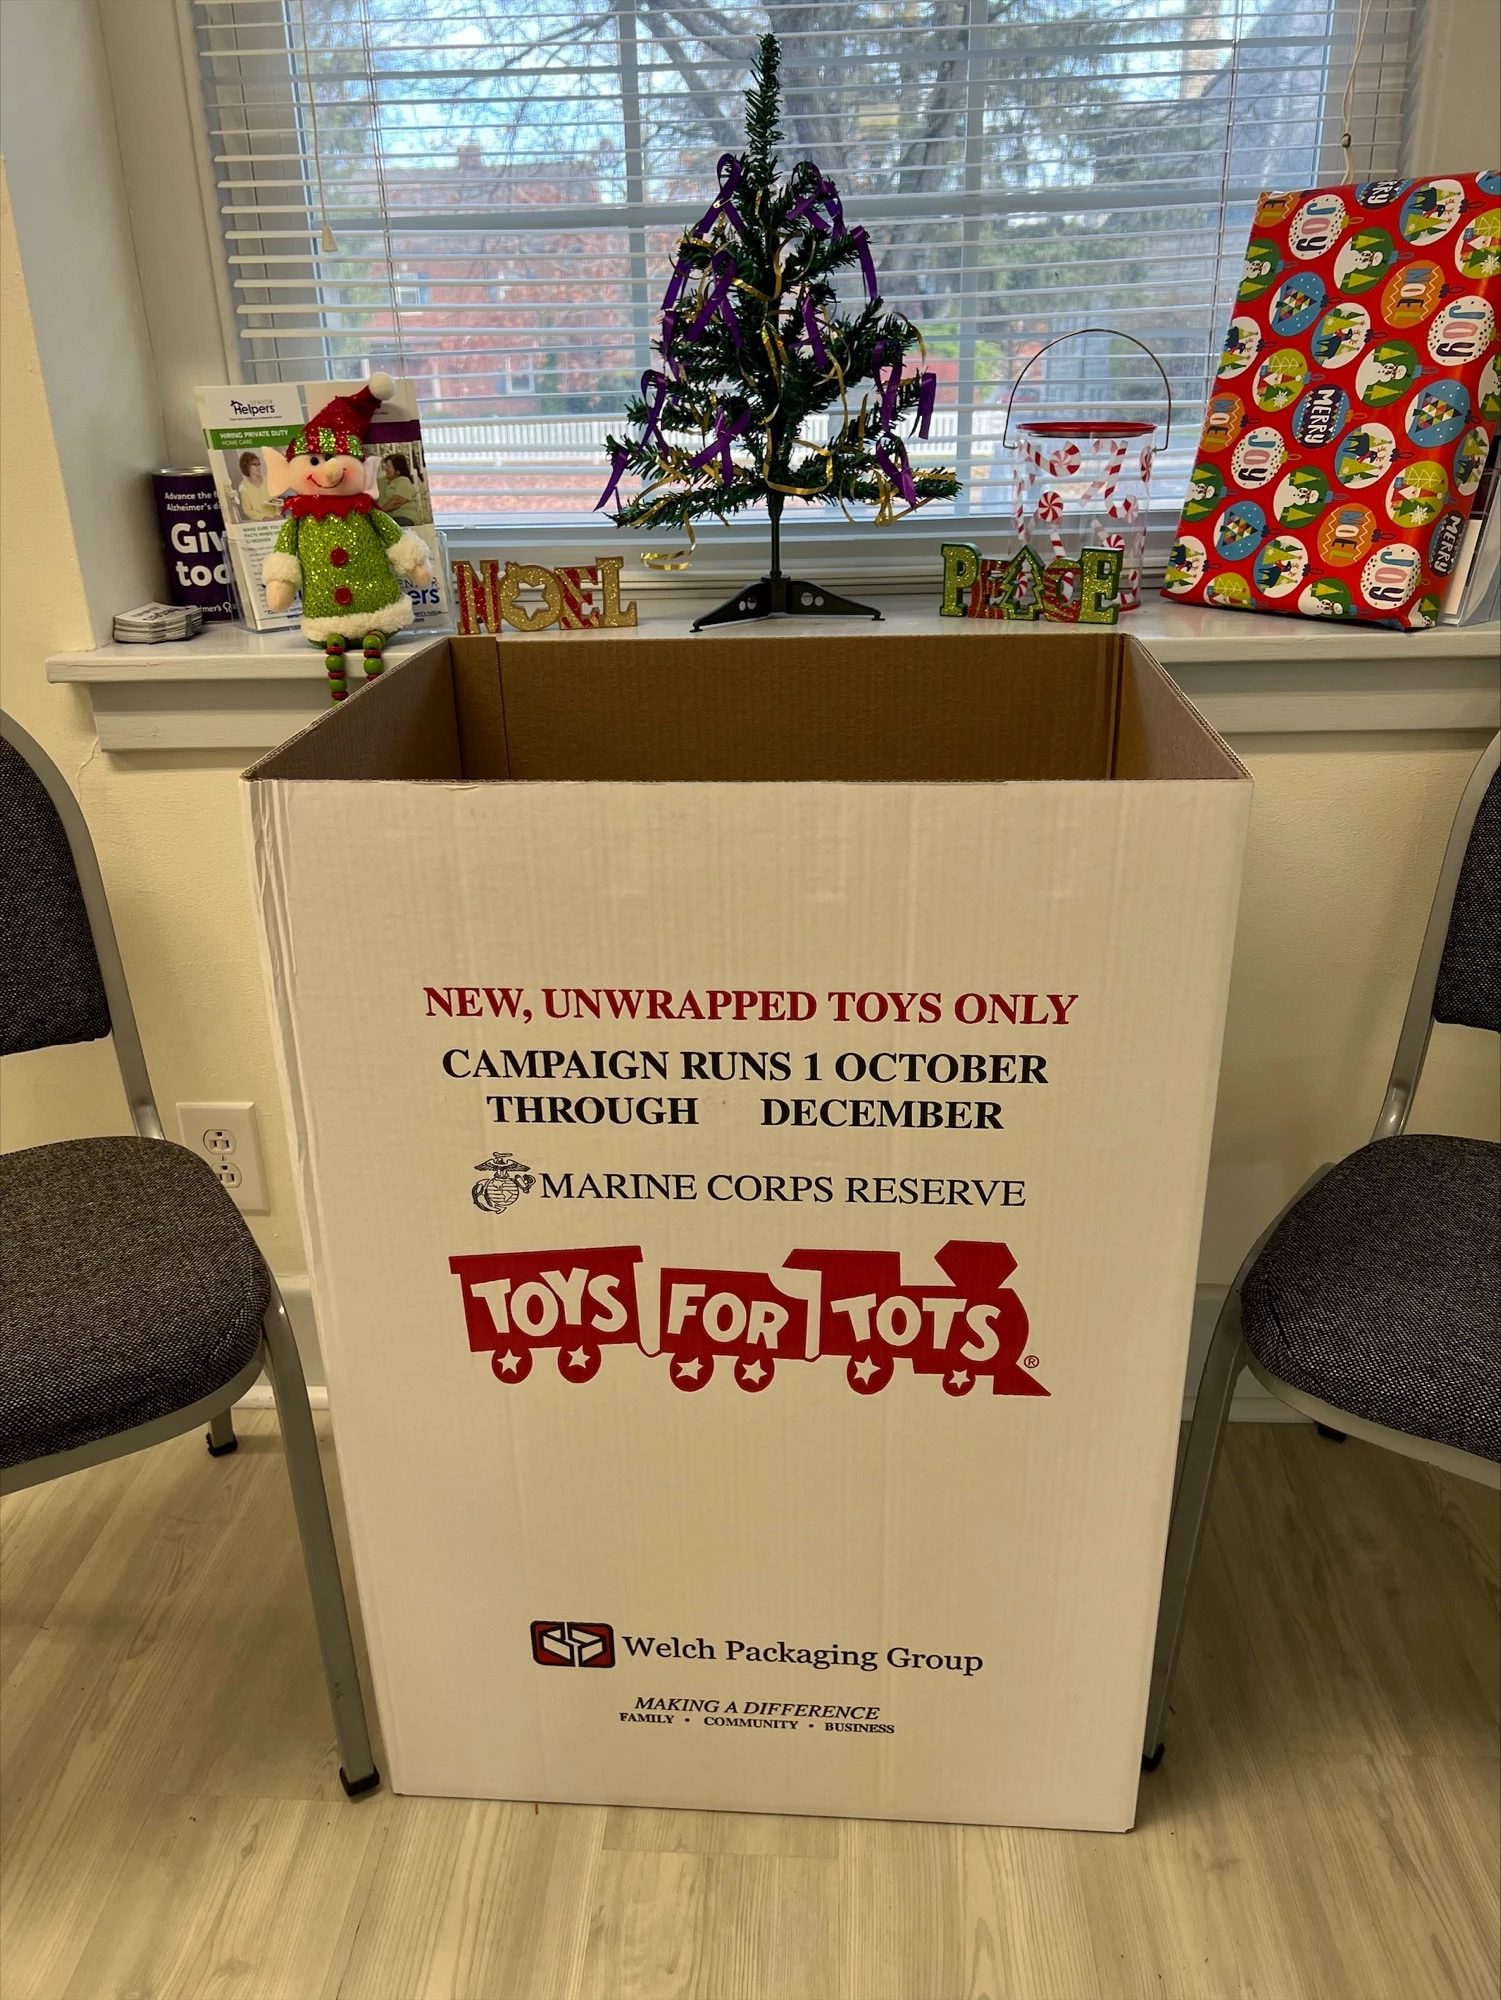 Senior Helpers Warren location is collecting new/unwrapped toys for Toys for Tots this holiday season.